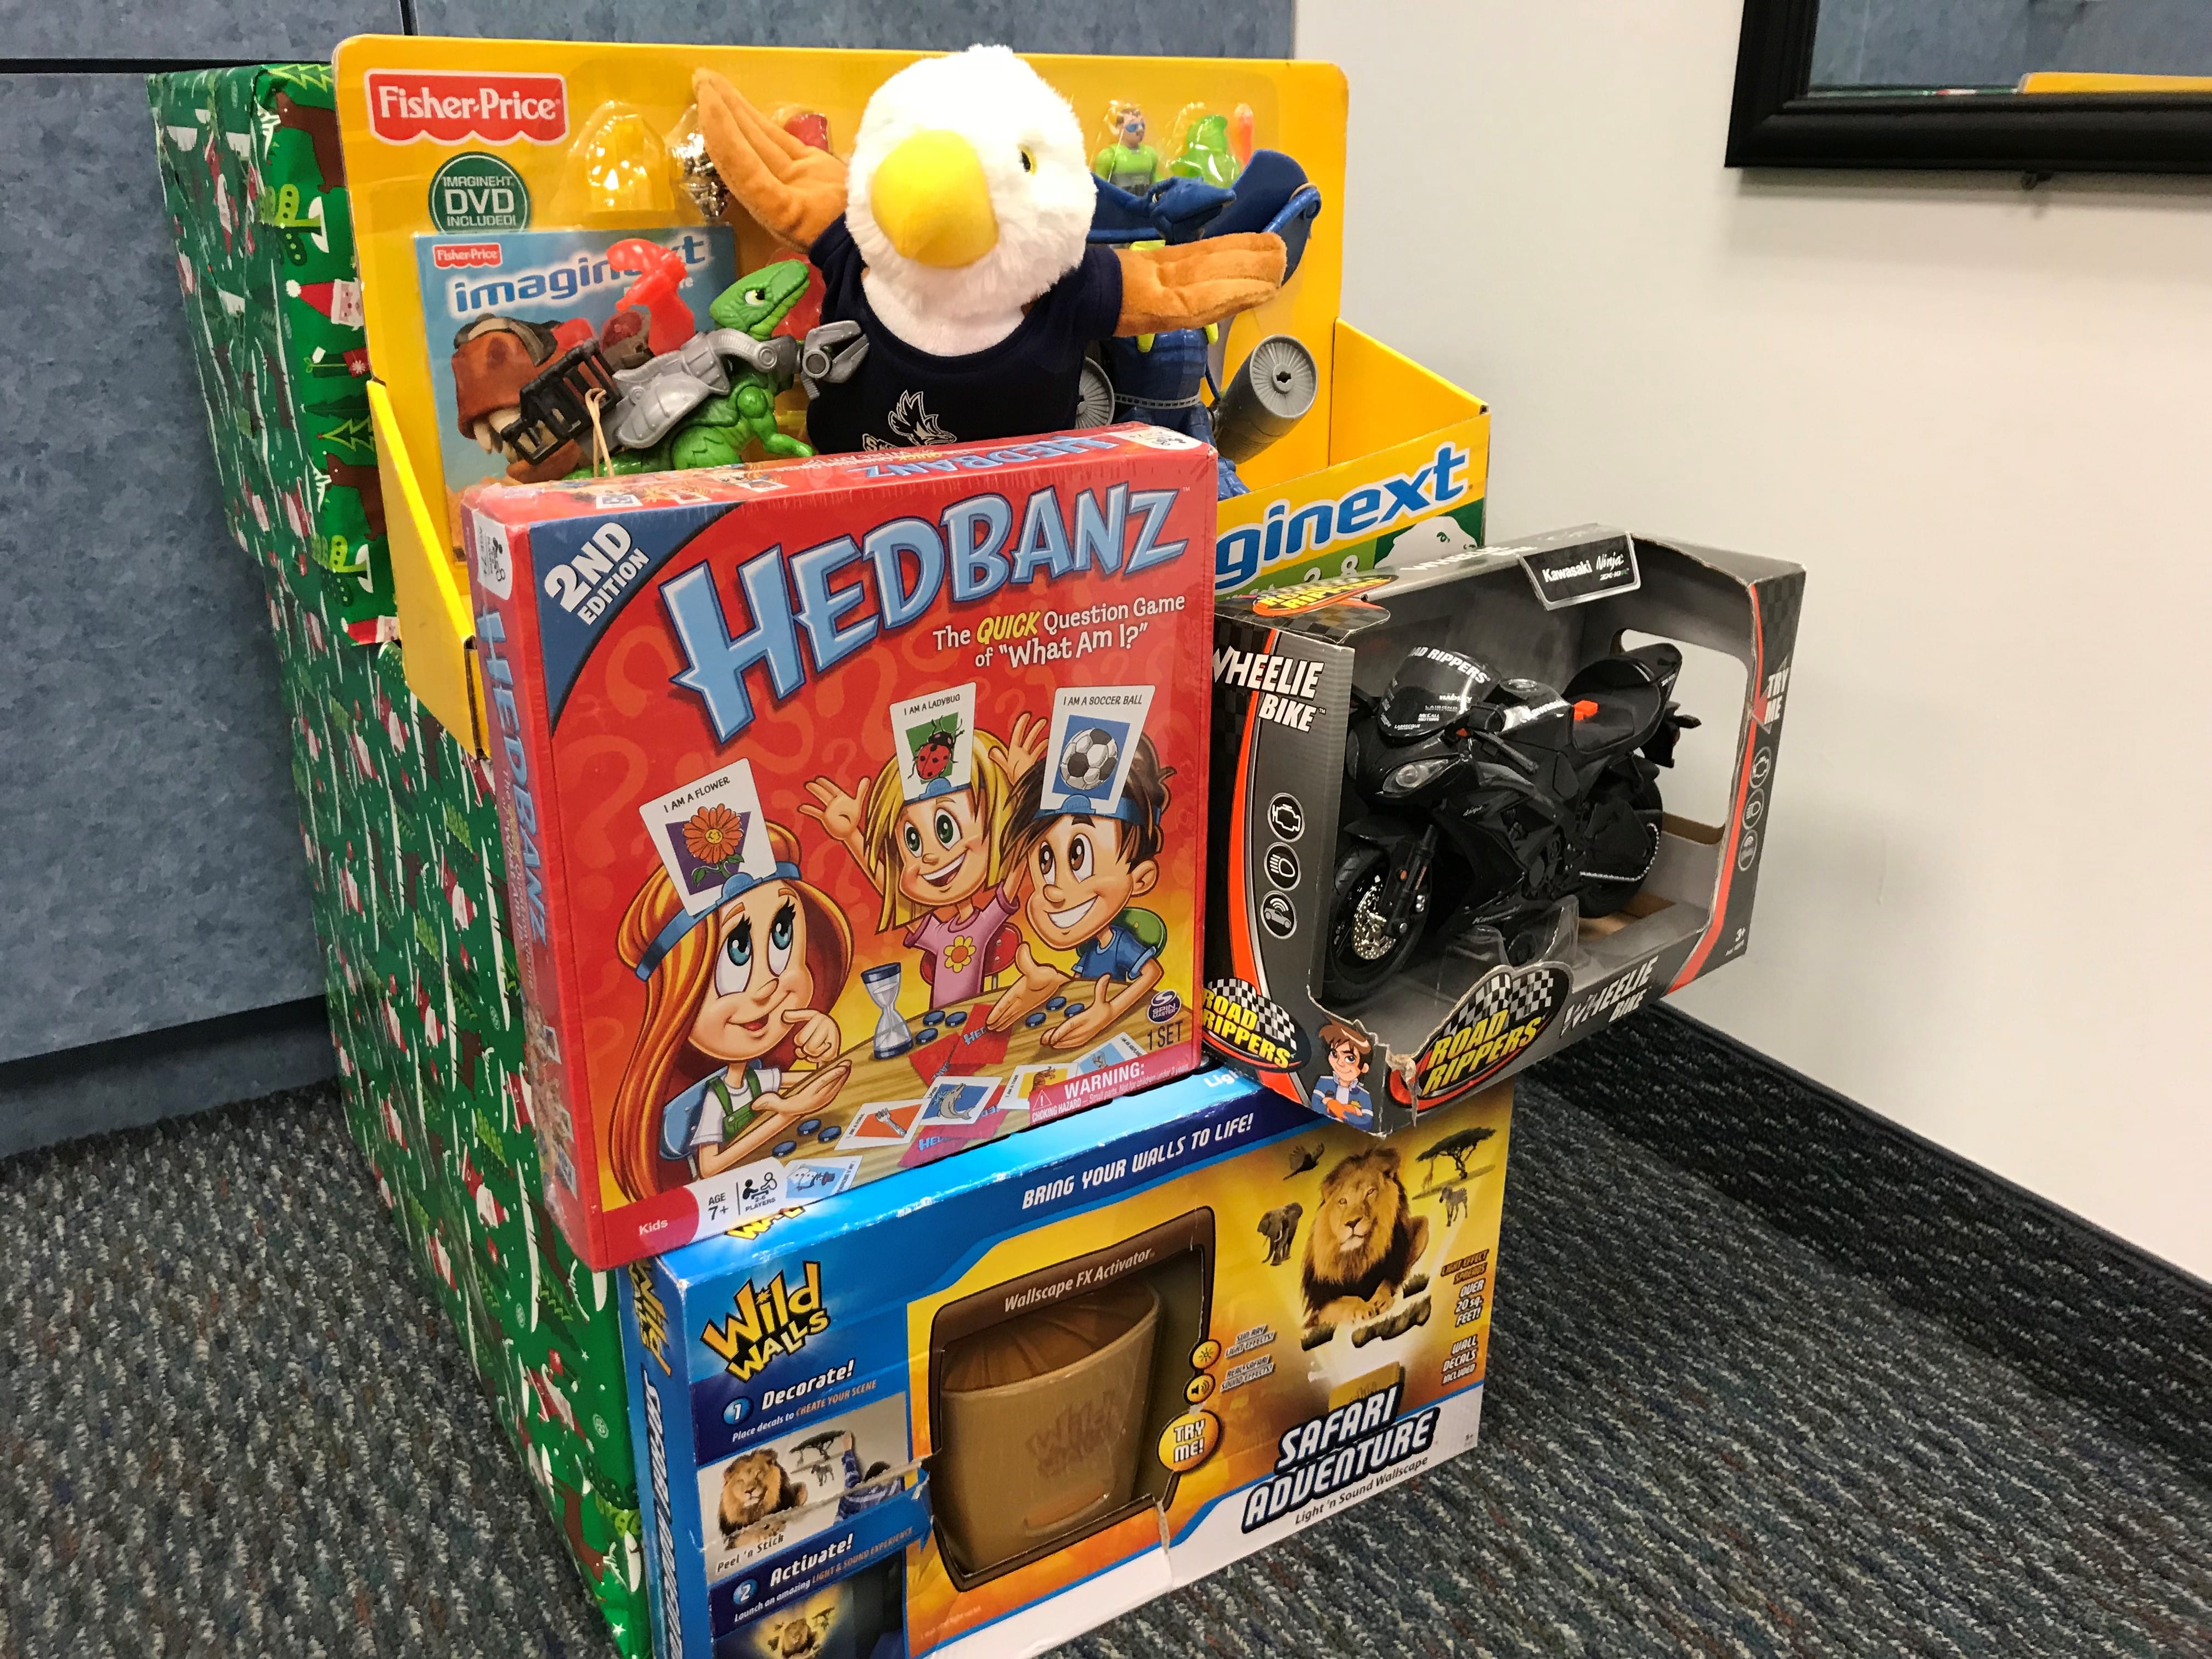 Pembroke Pines Launches Toys for Tots Donation Drive